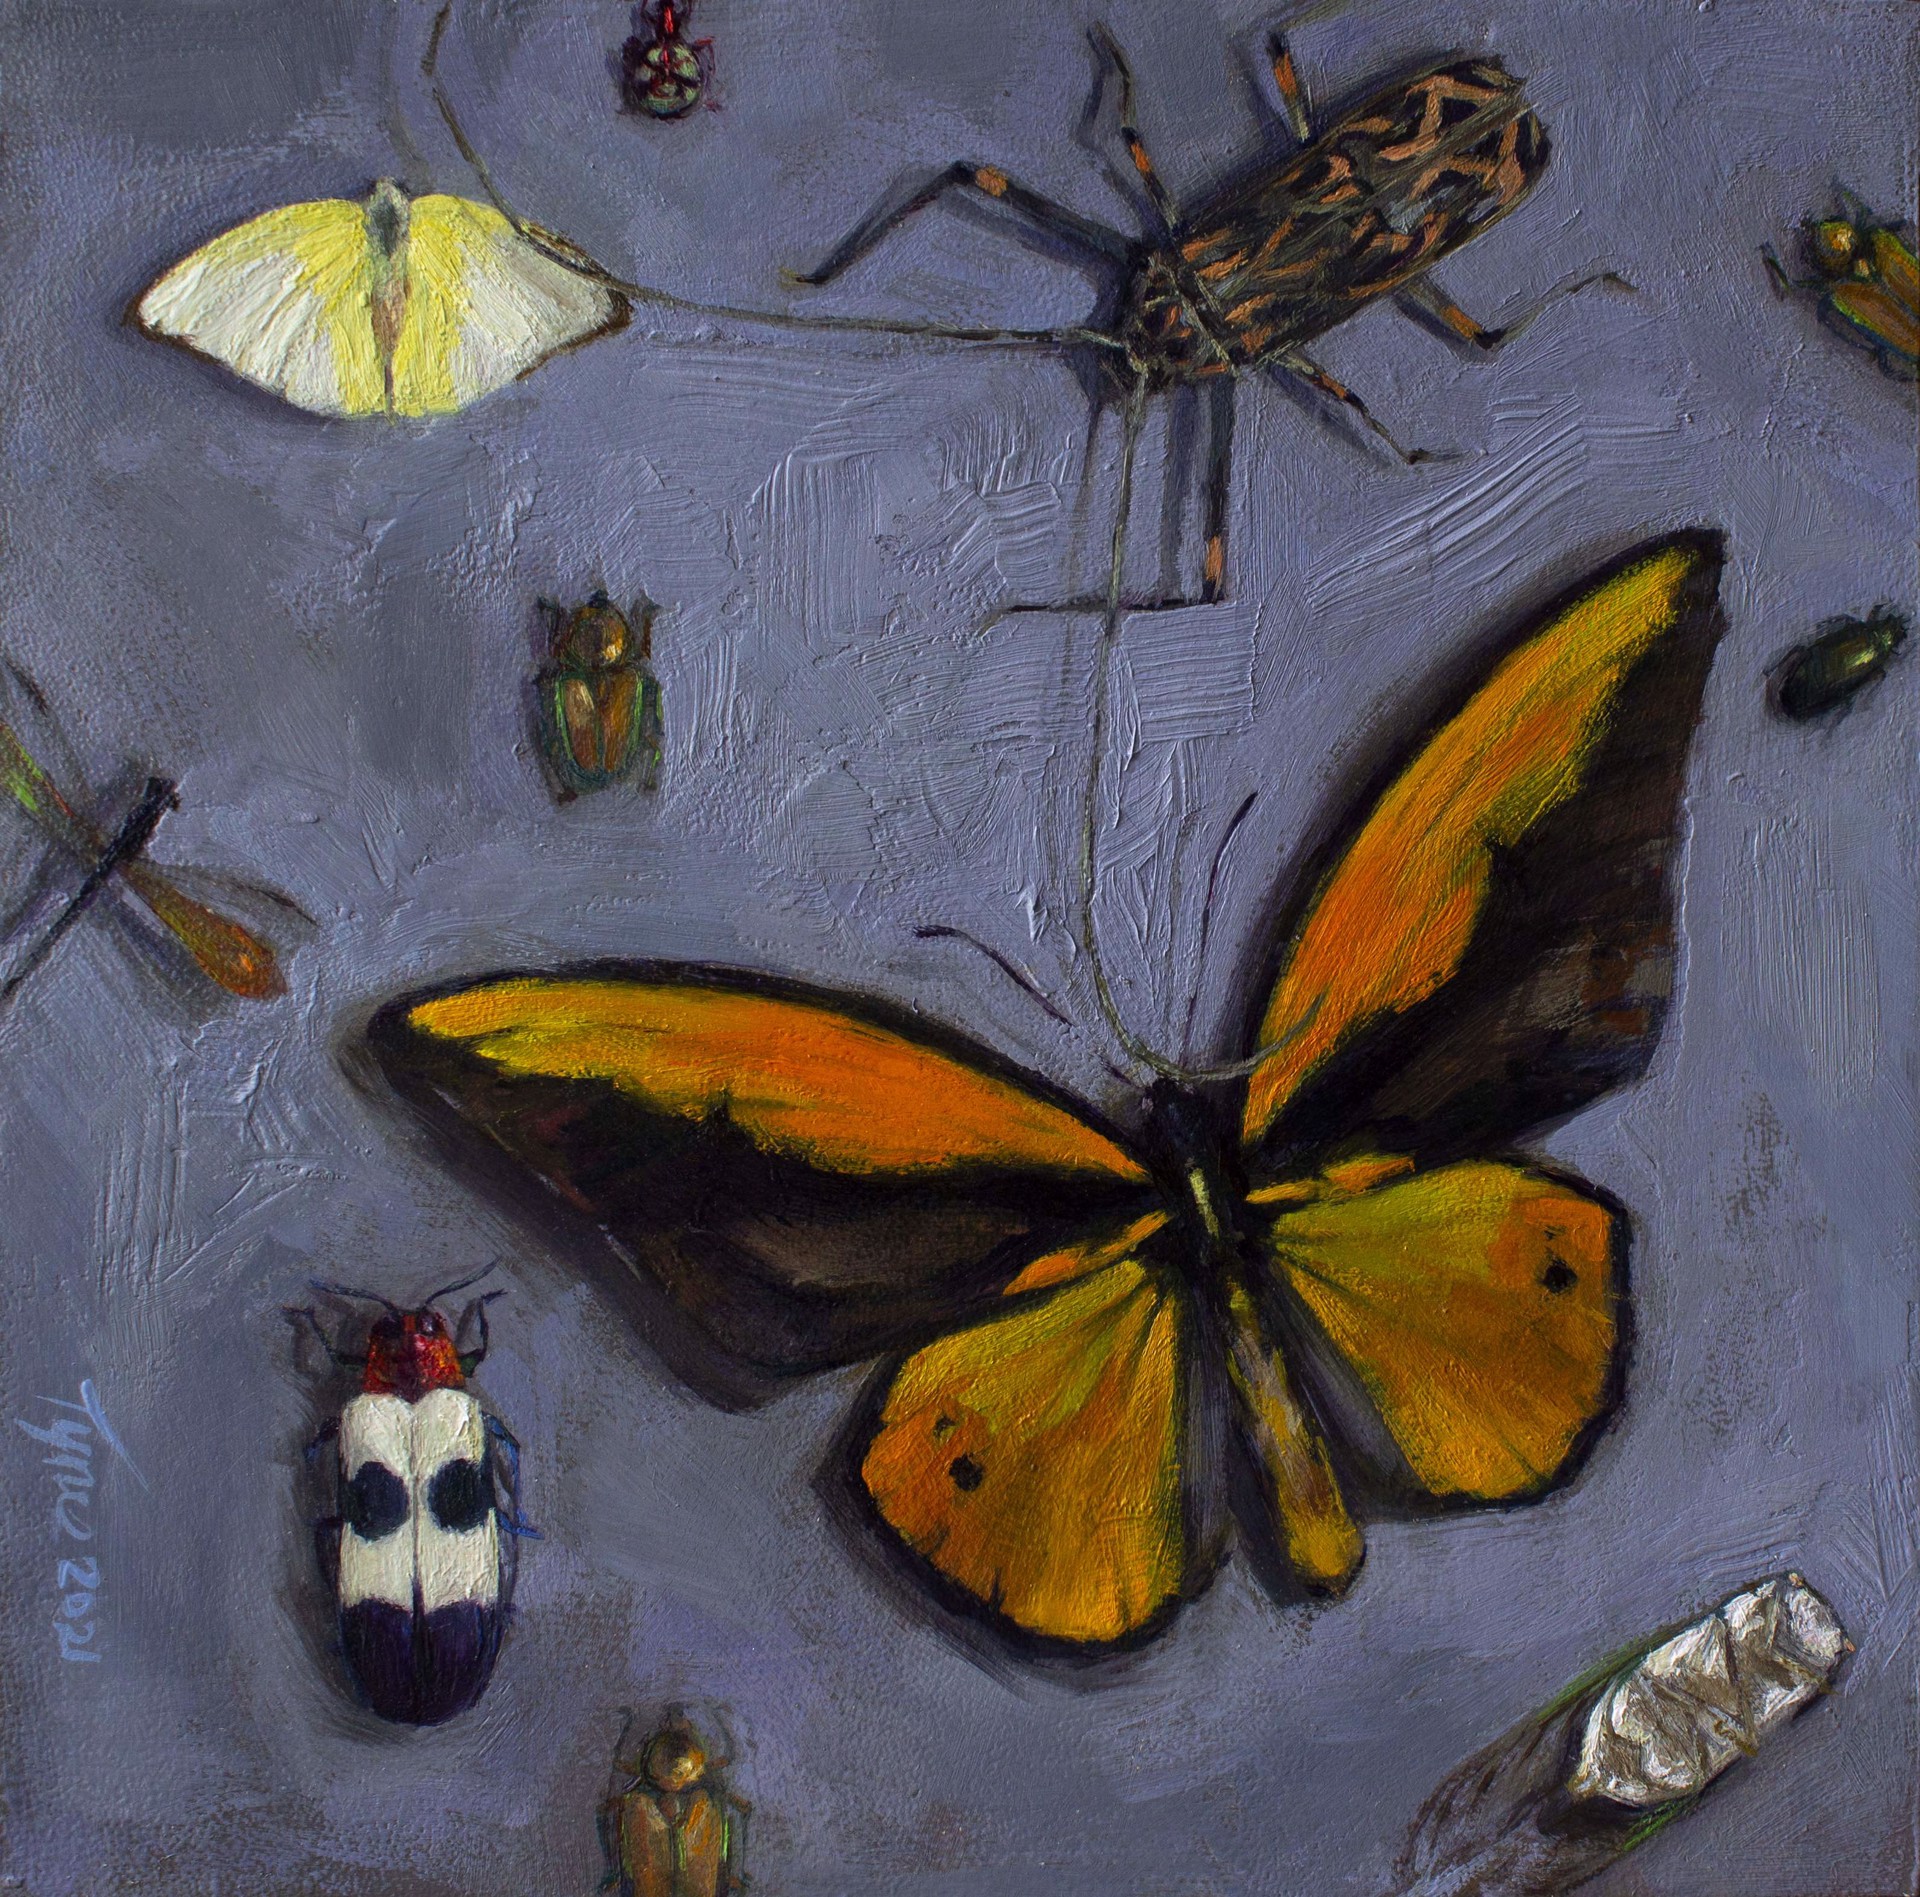 Insect Square by Taylor Tynes